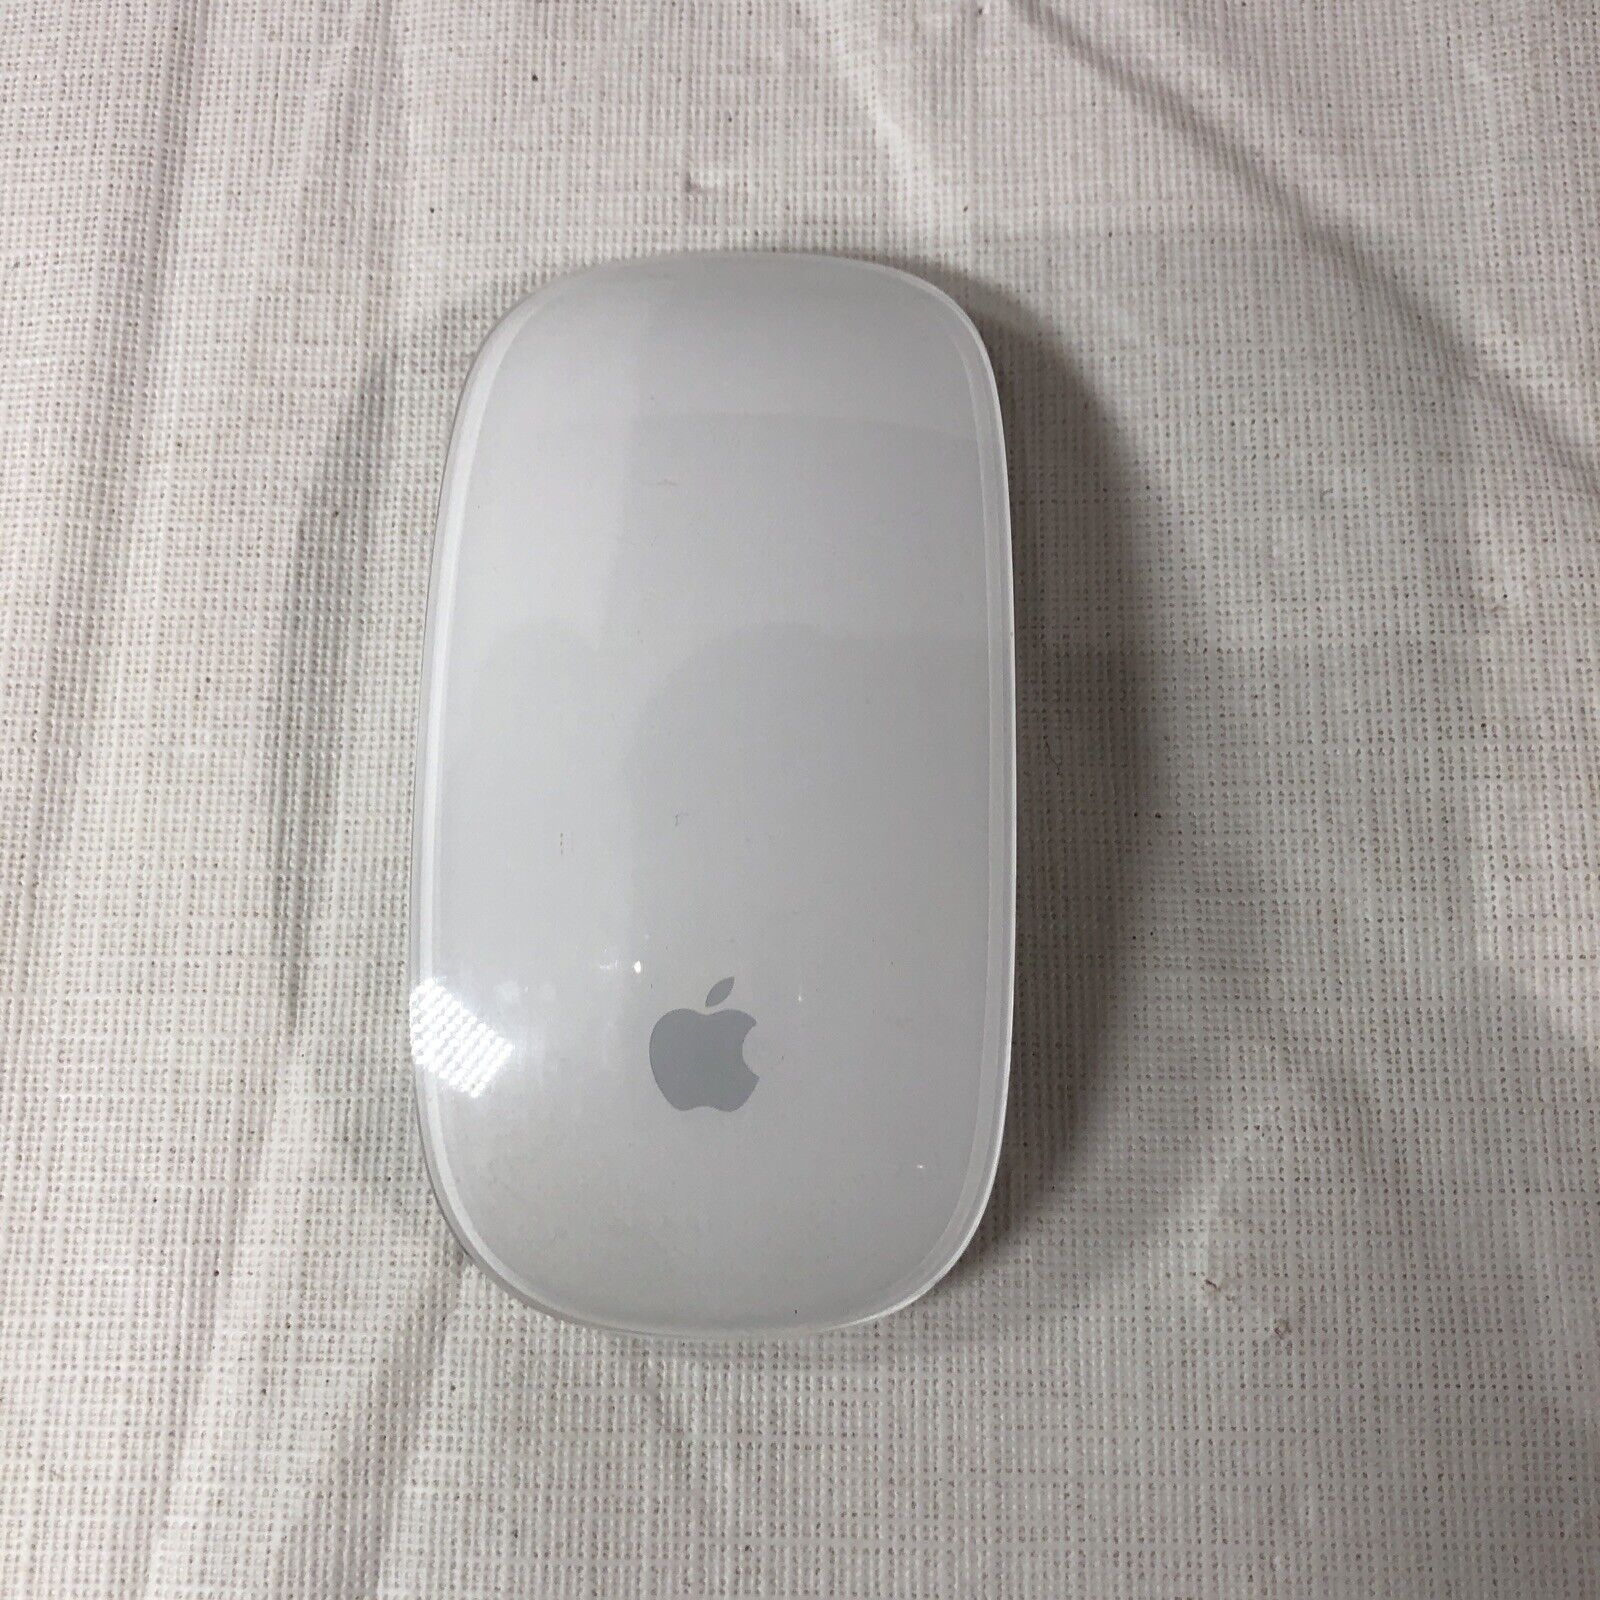 Apple Magic Mouse Bluetooth Wireless Laser White A1296